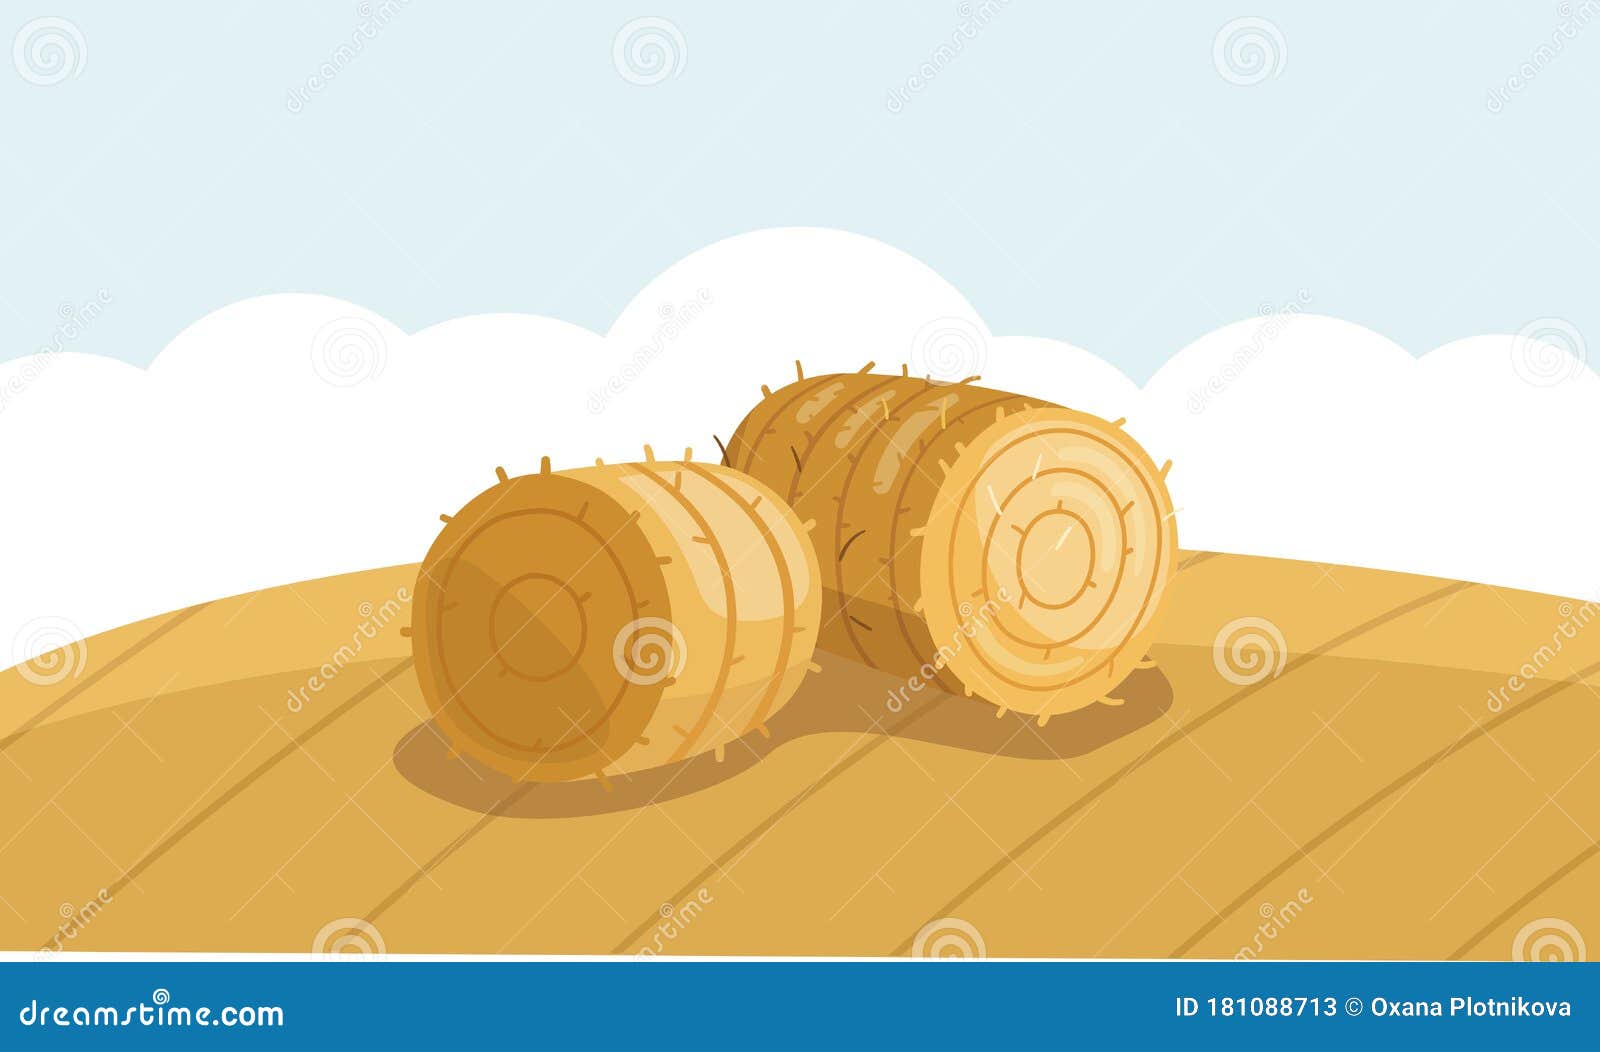 Round Bale Drawing Stock Illustrations 158 Round Bale Drawing Stock Illustrations Vectors Clipart Dreamstime